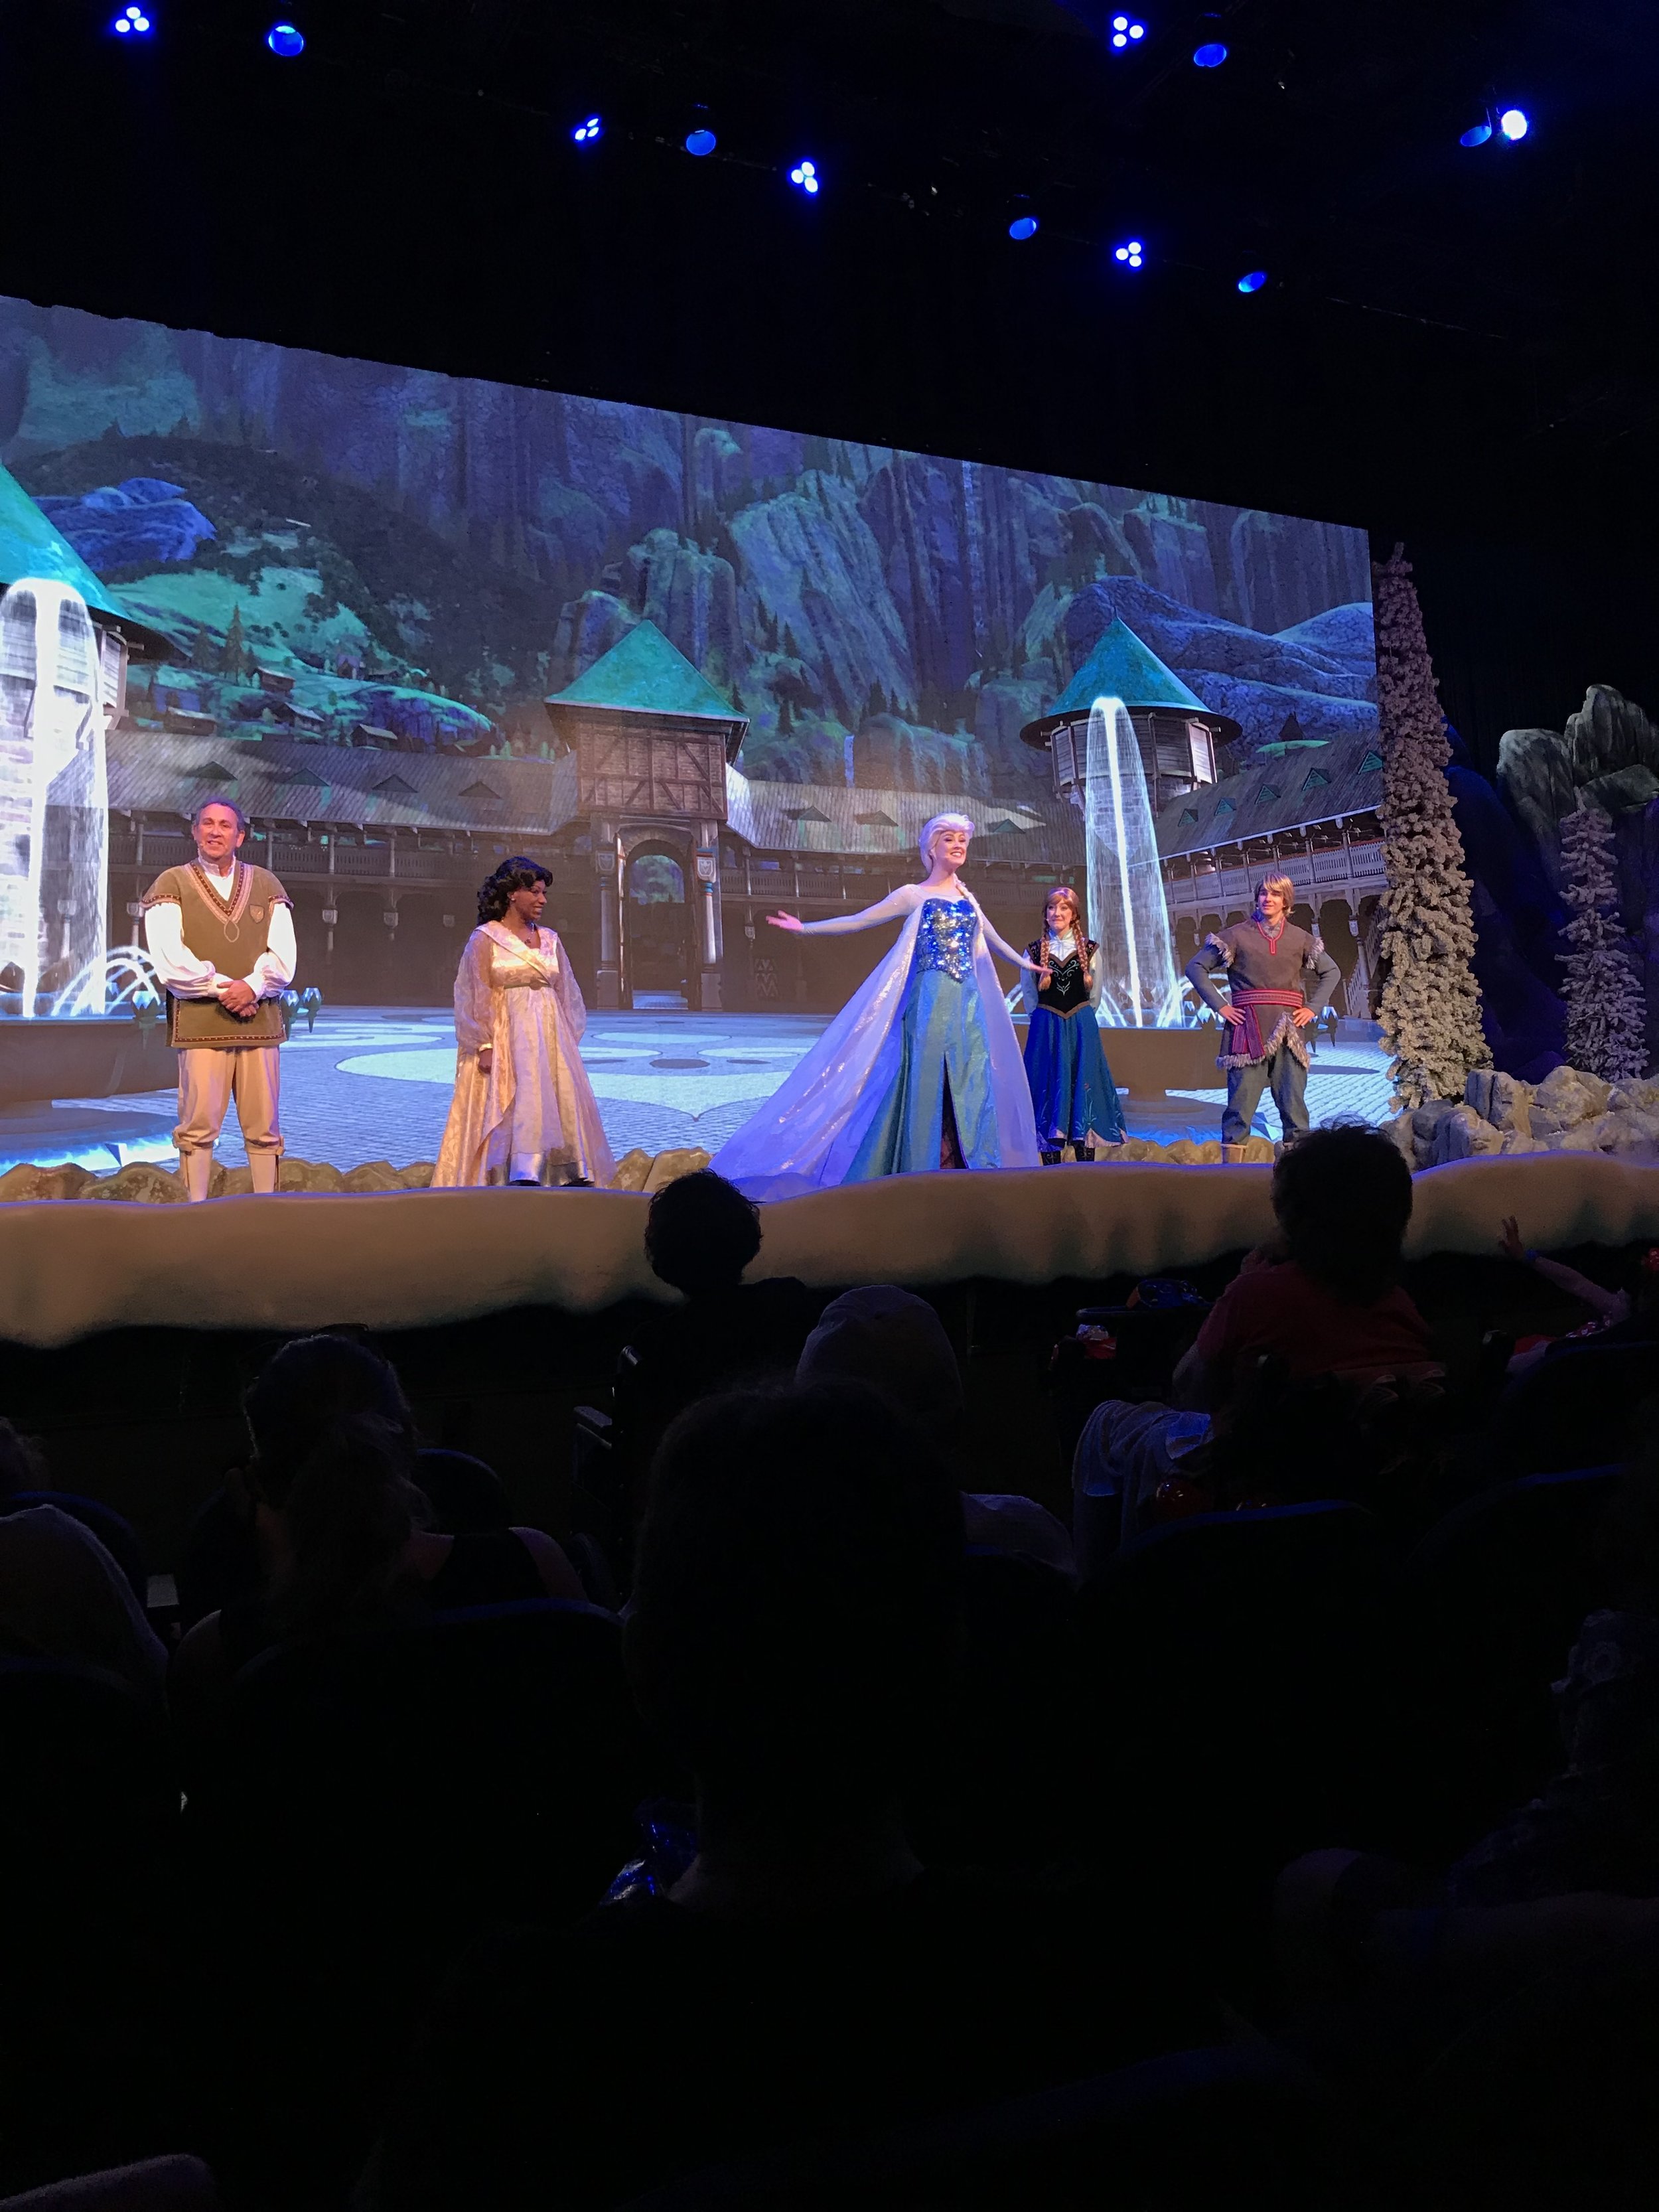 Disney-with-toddlers-frozen-ever-afterjpg.jpg